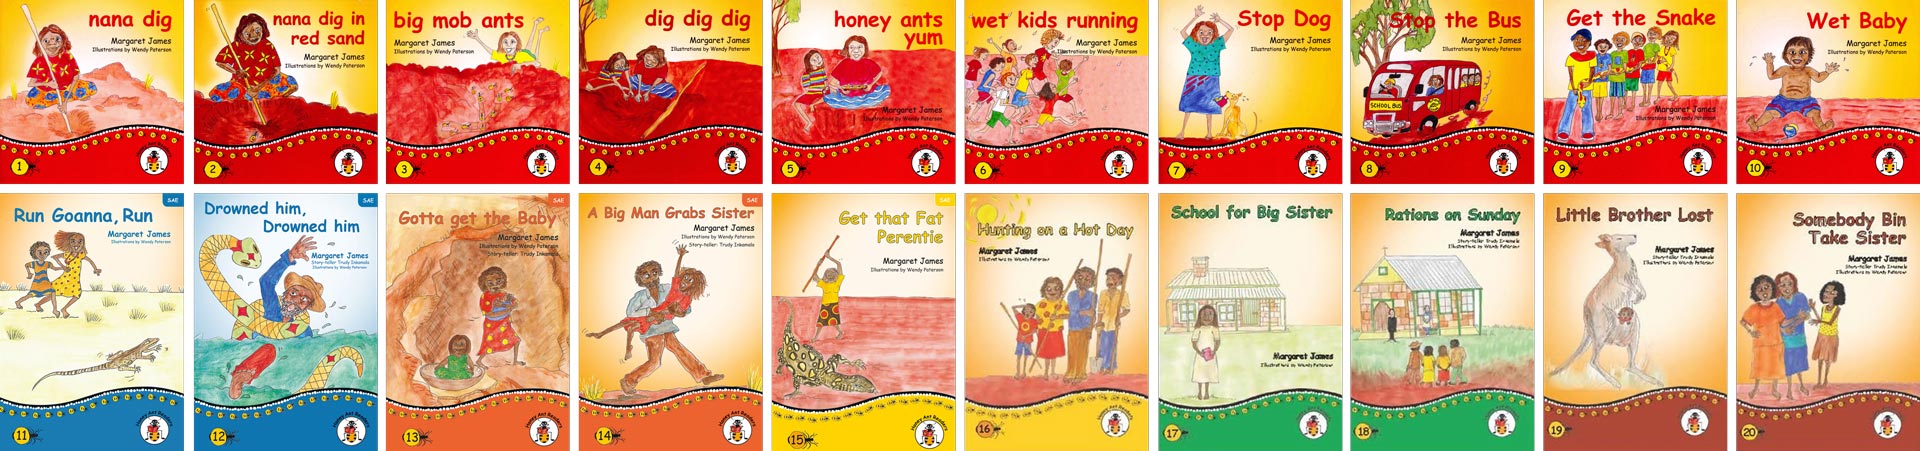 Honey Ant Readers Book Collection